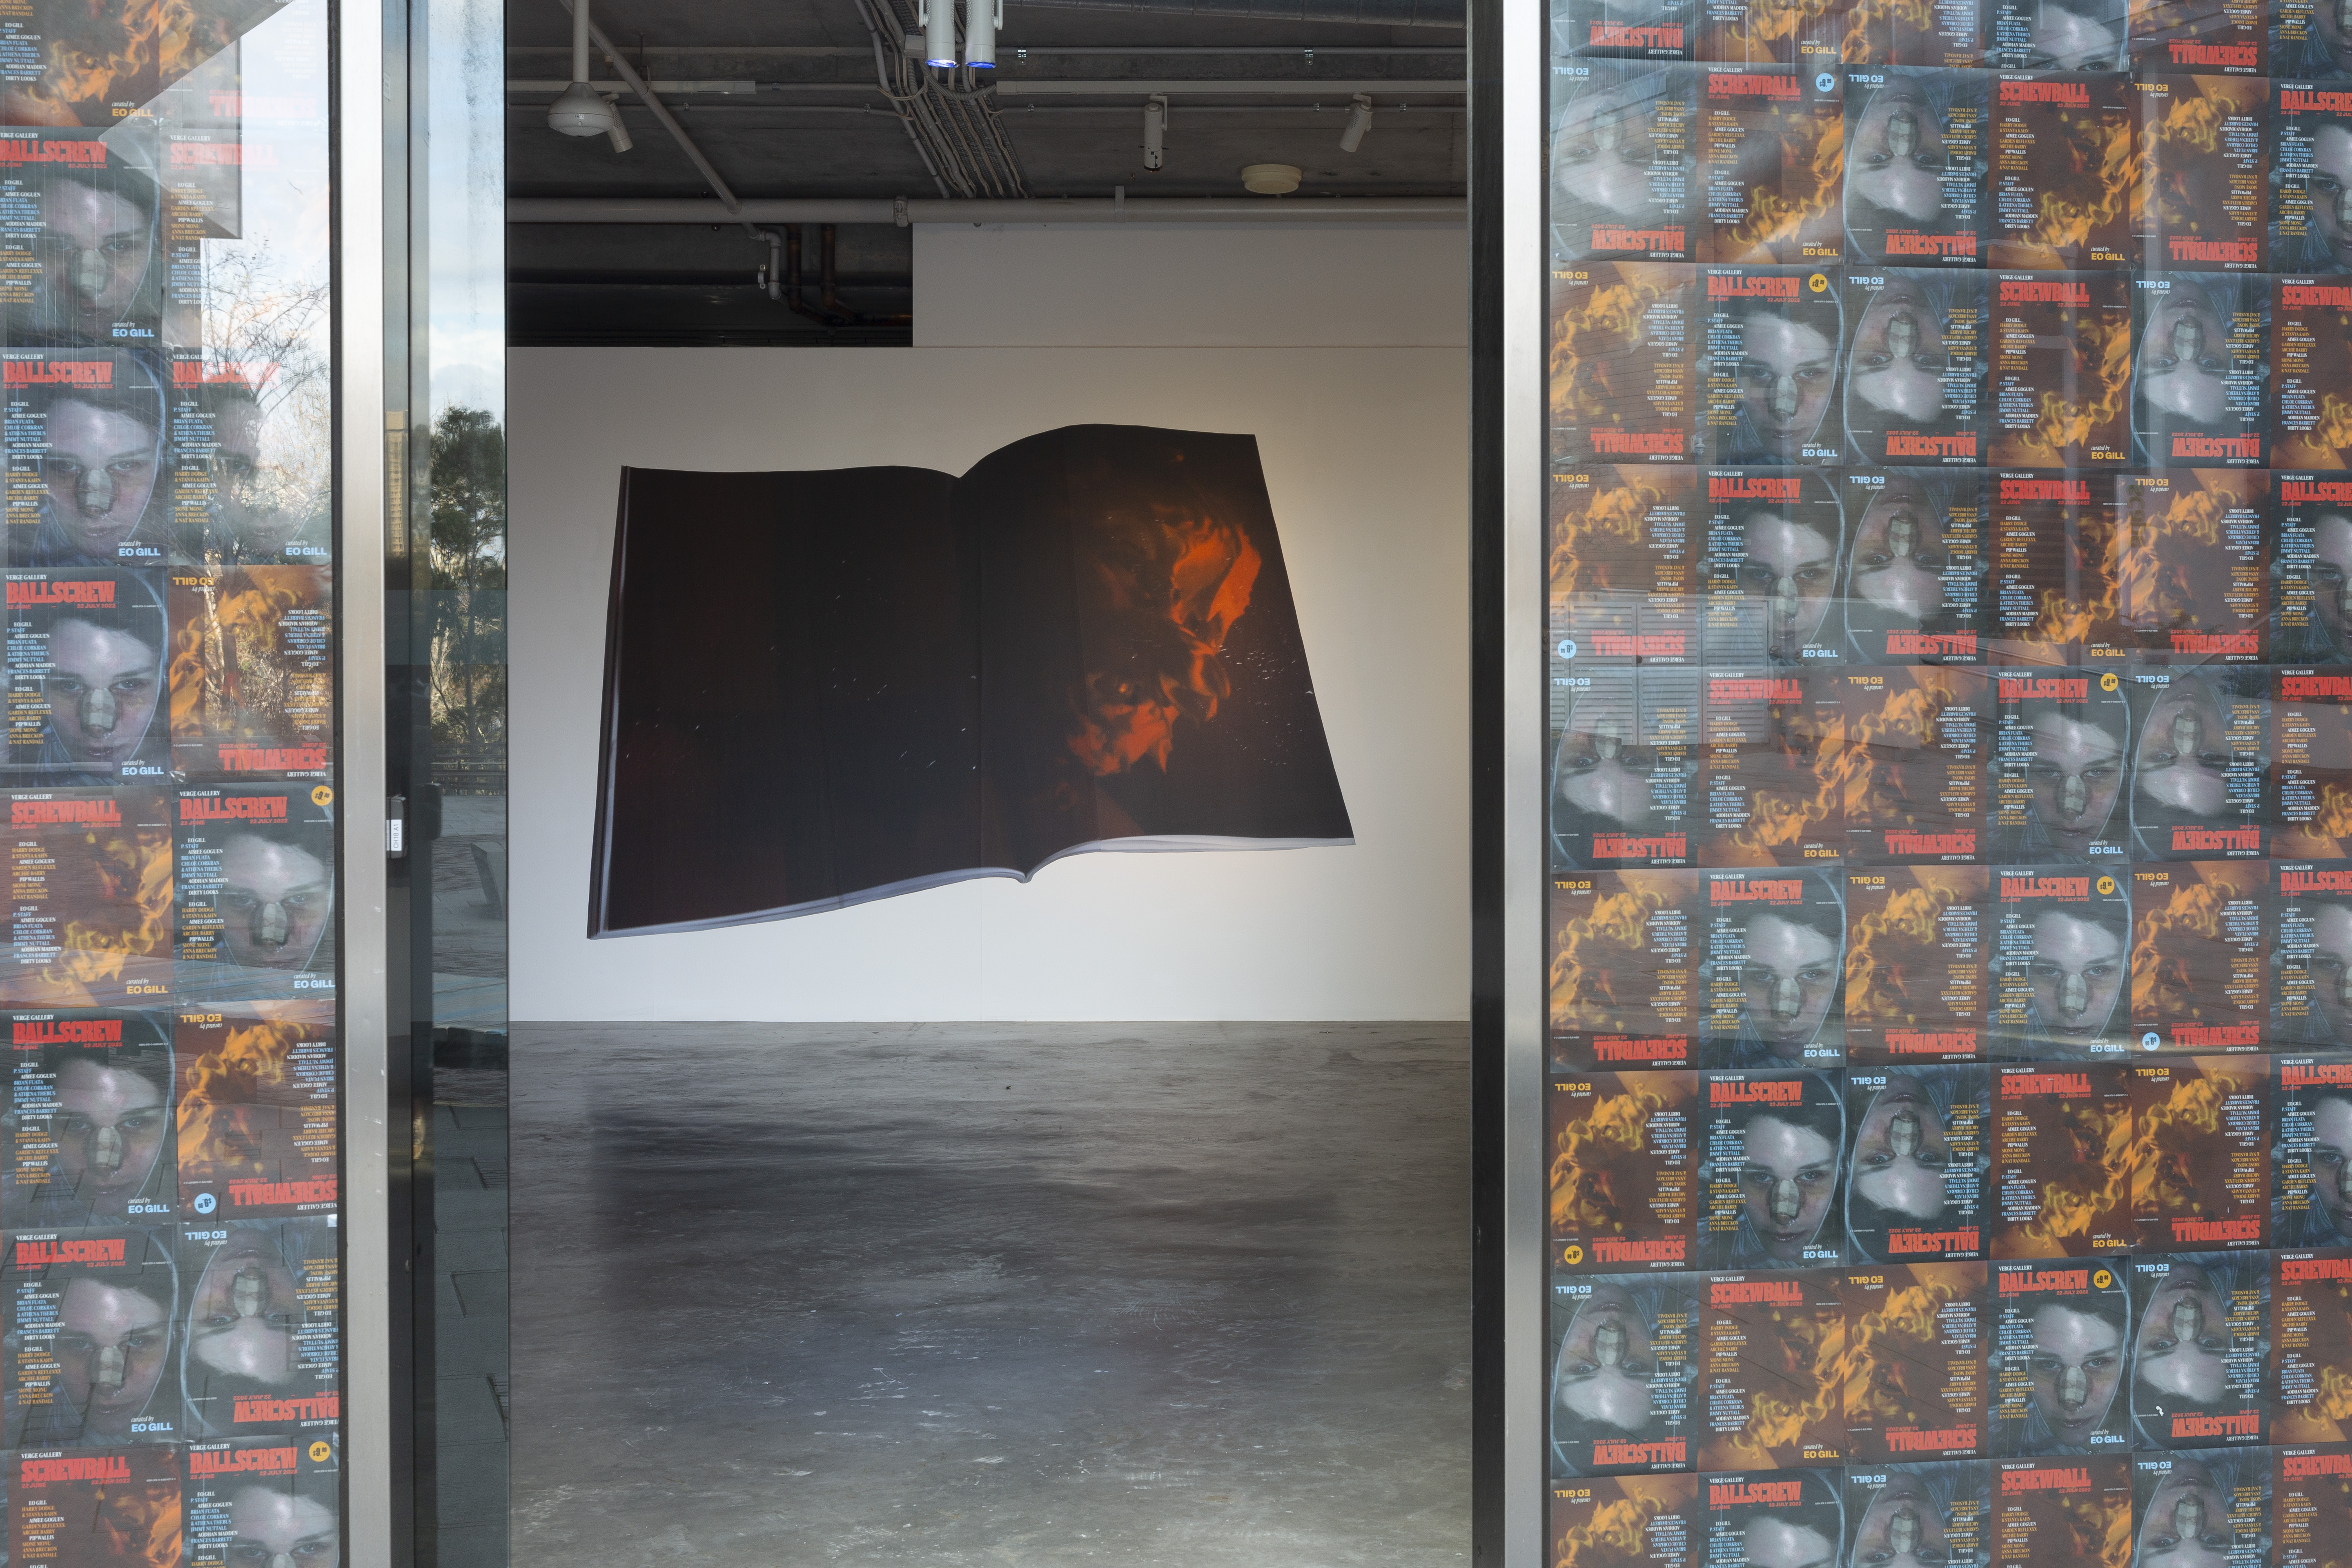 <em>Screwball,</em> 2022, gallery front and installation view, dimensions variable. Photography by Jek Maurer.